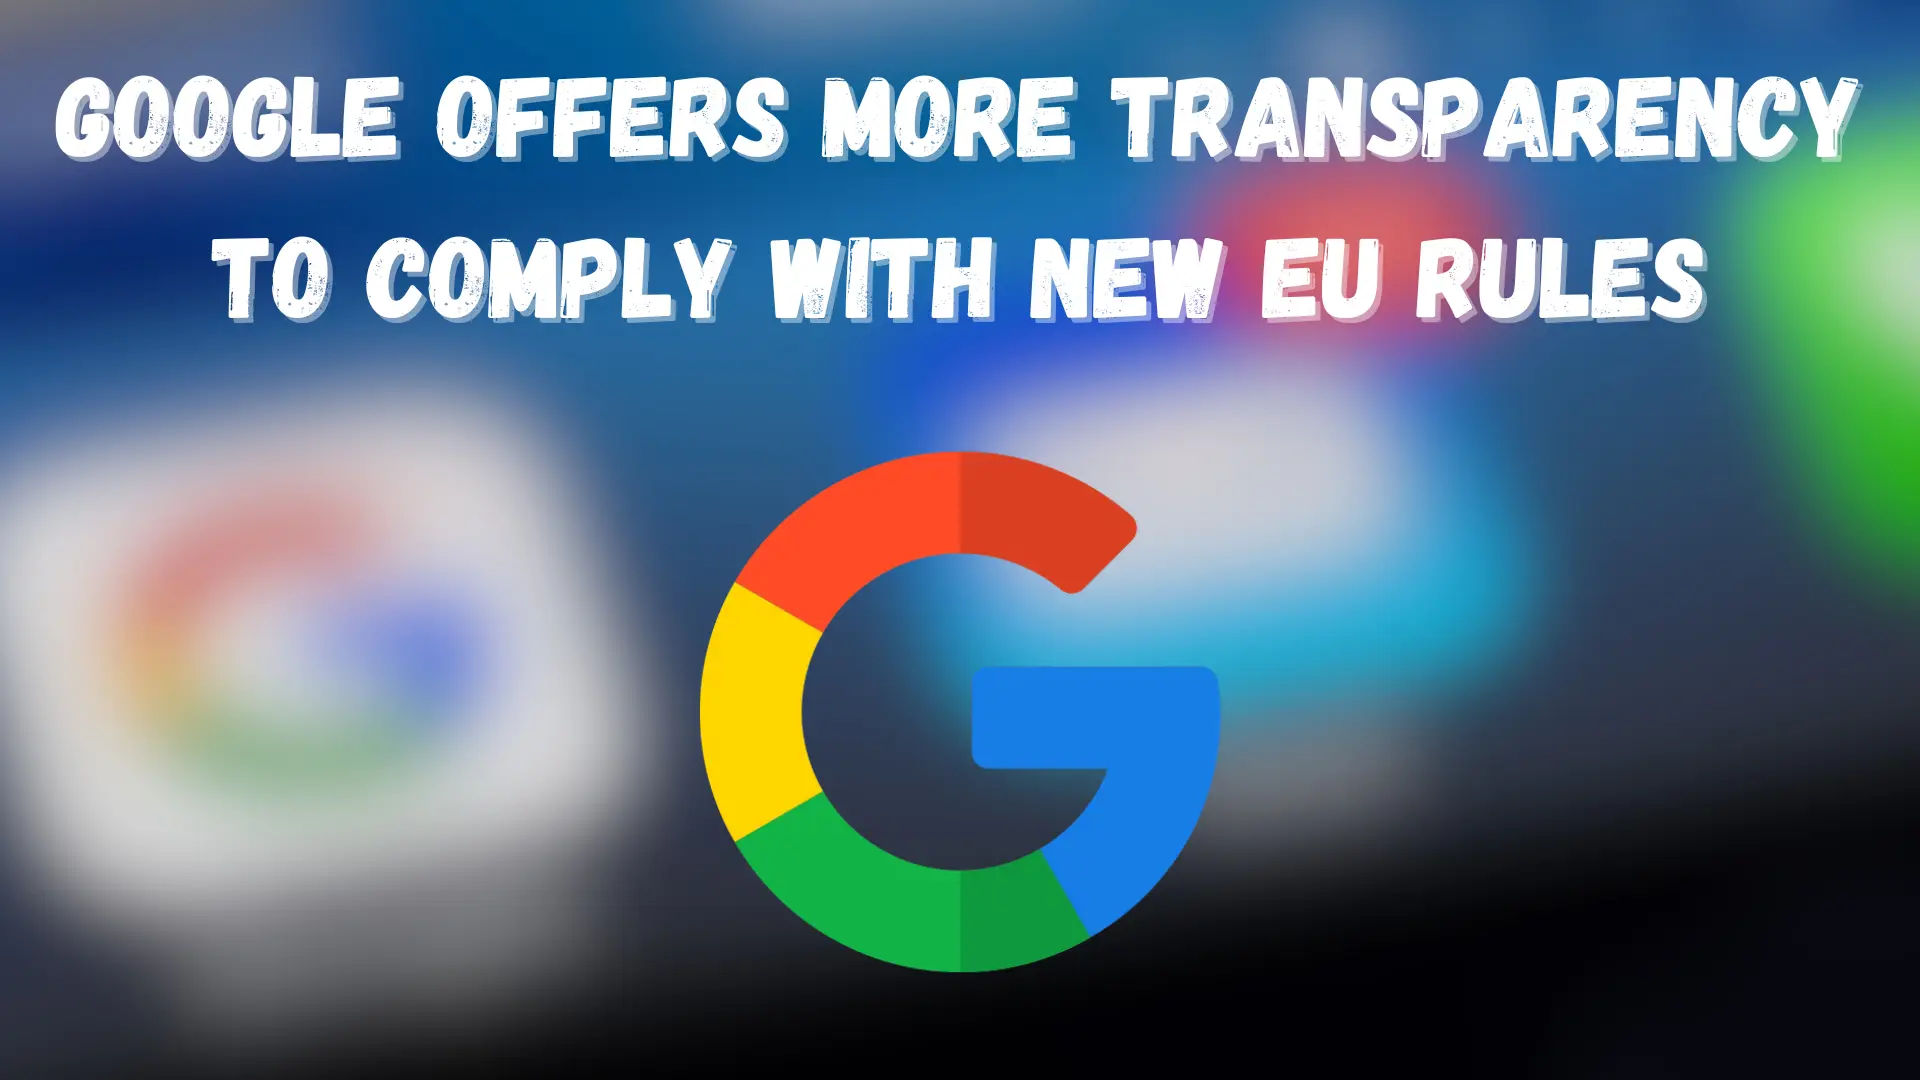 Google Offers More Transparency to Comply with New EU Rules